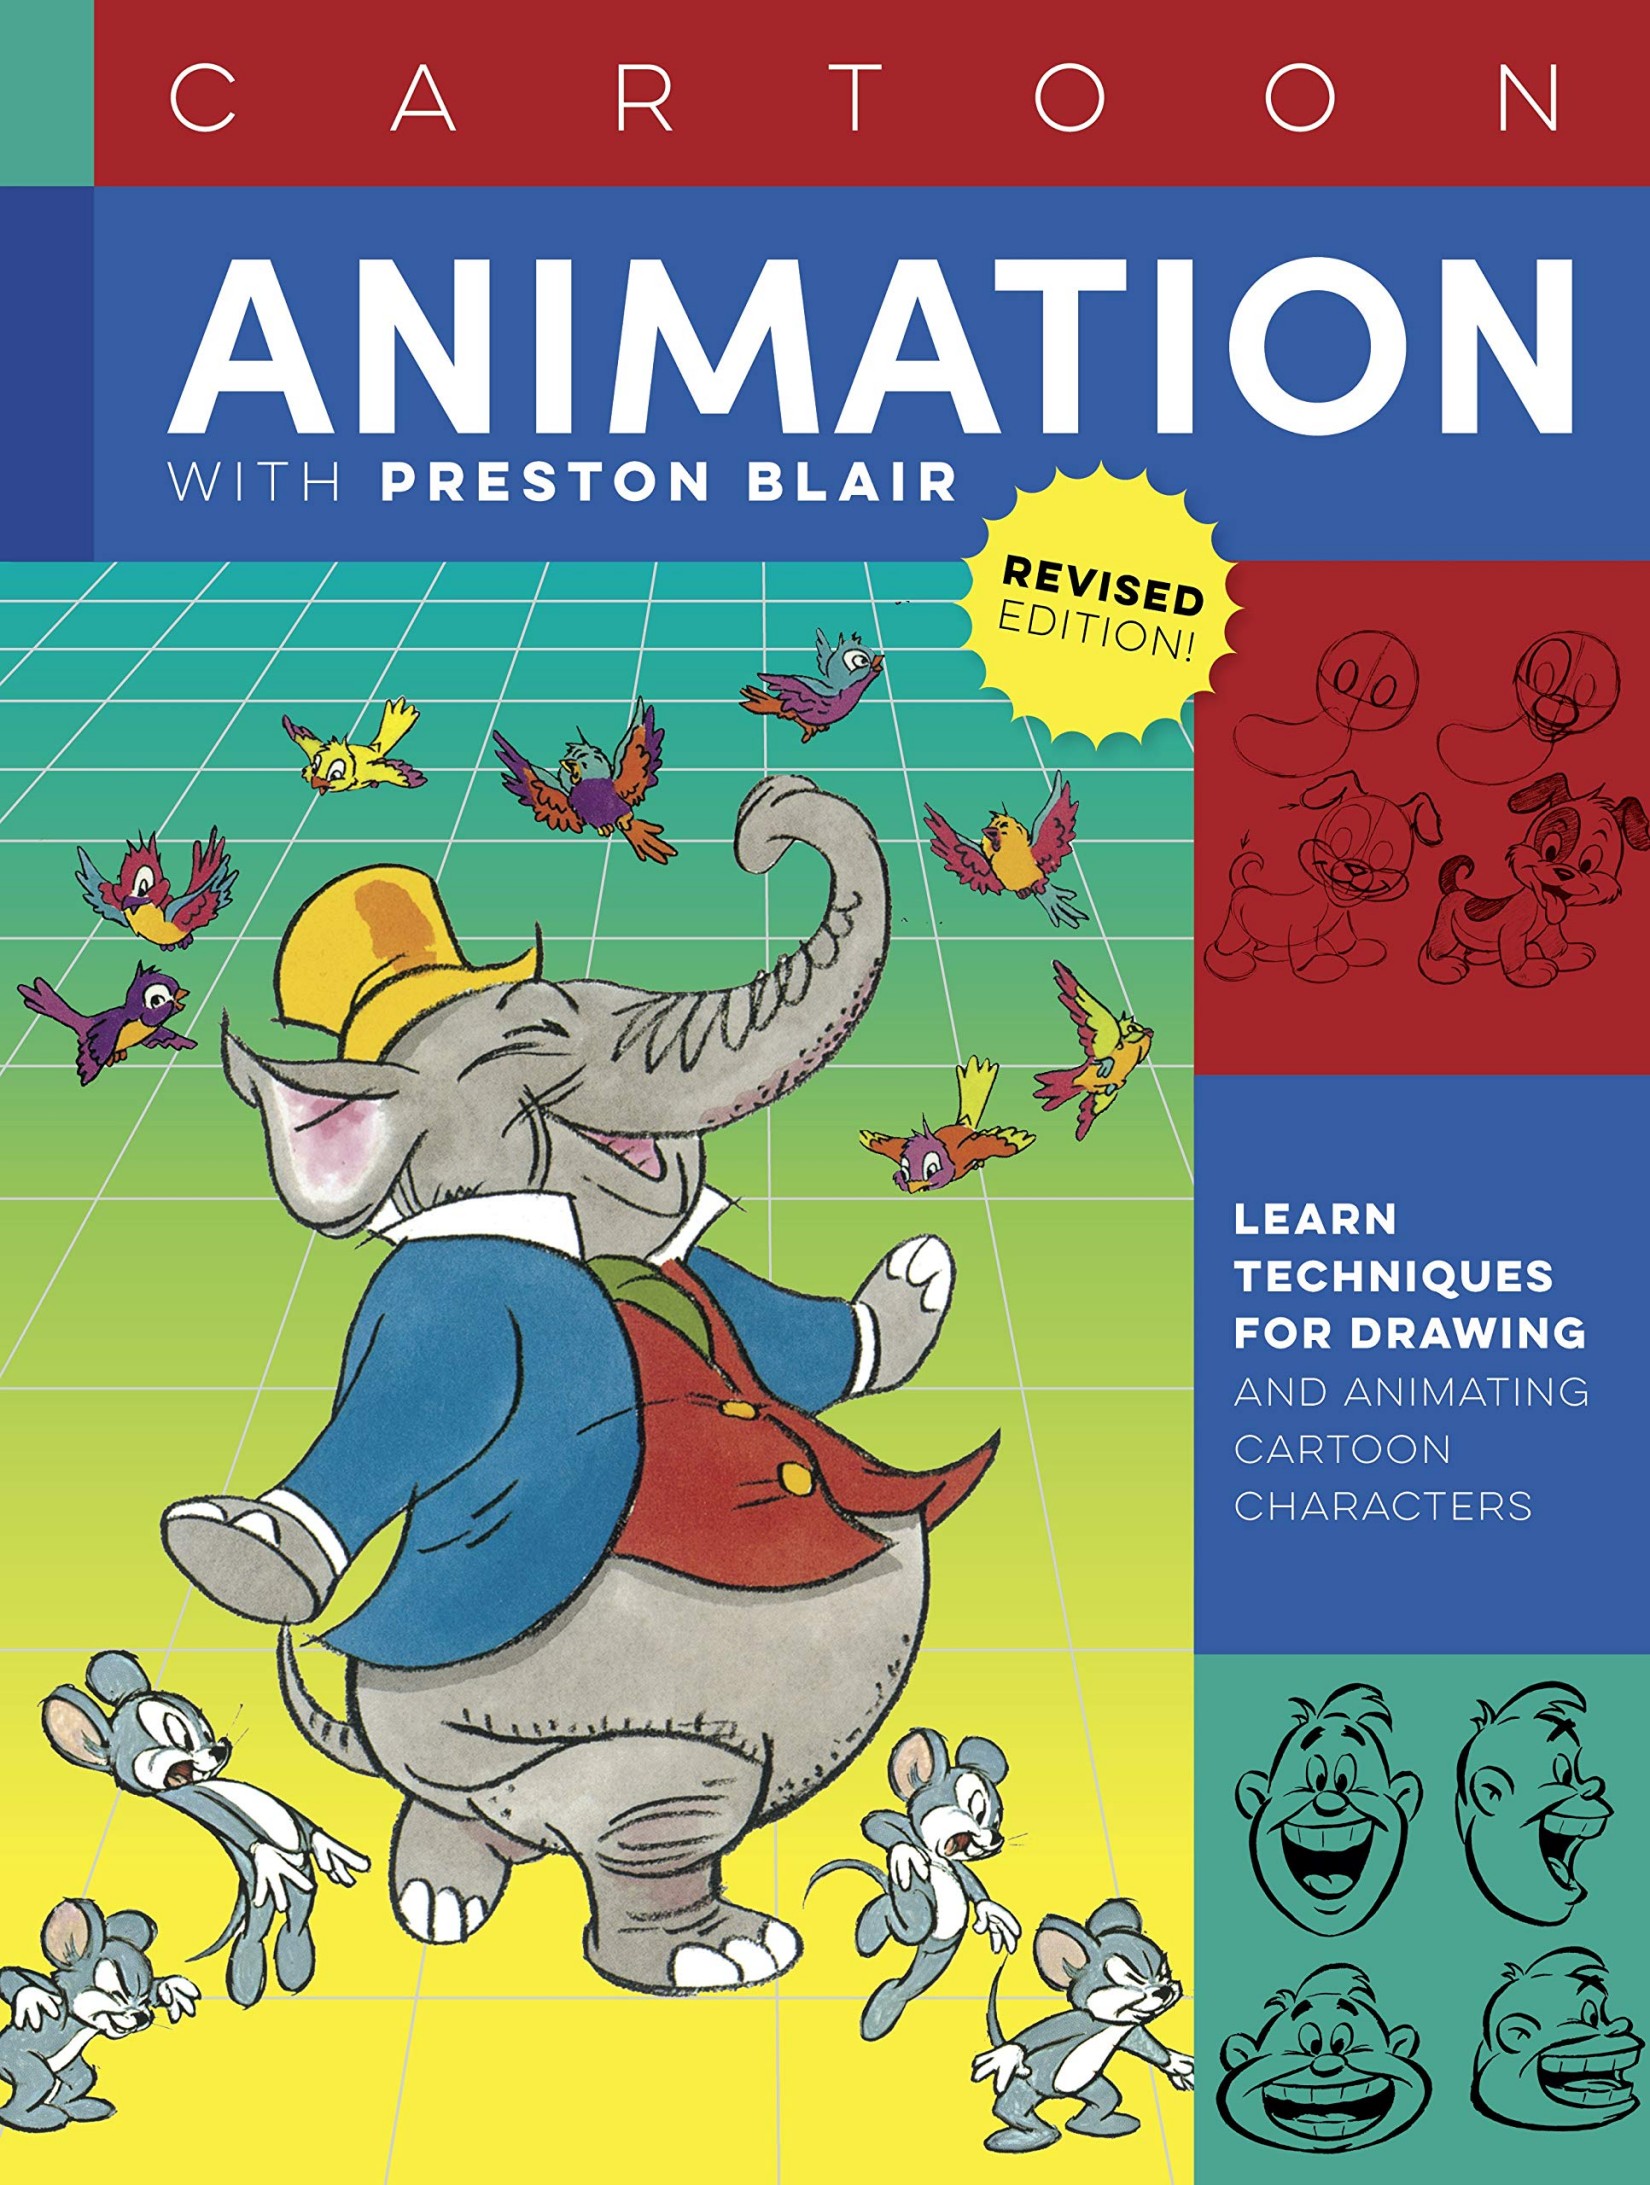 Cartoon Animation With Preston Blair, Revised Edition!: Learn Techniques for Drawing and Animating Cartoon Characters